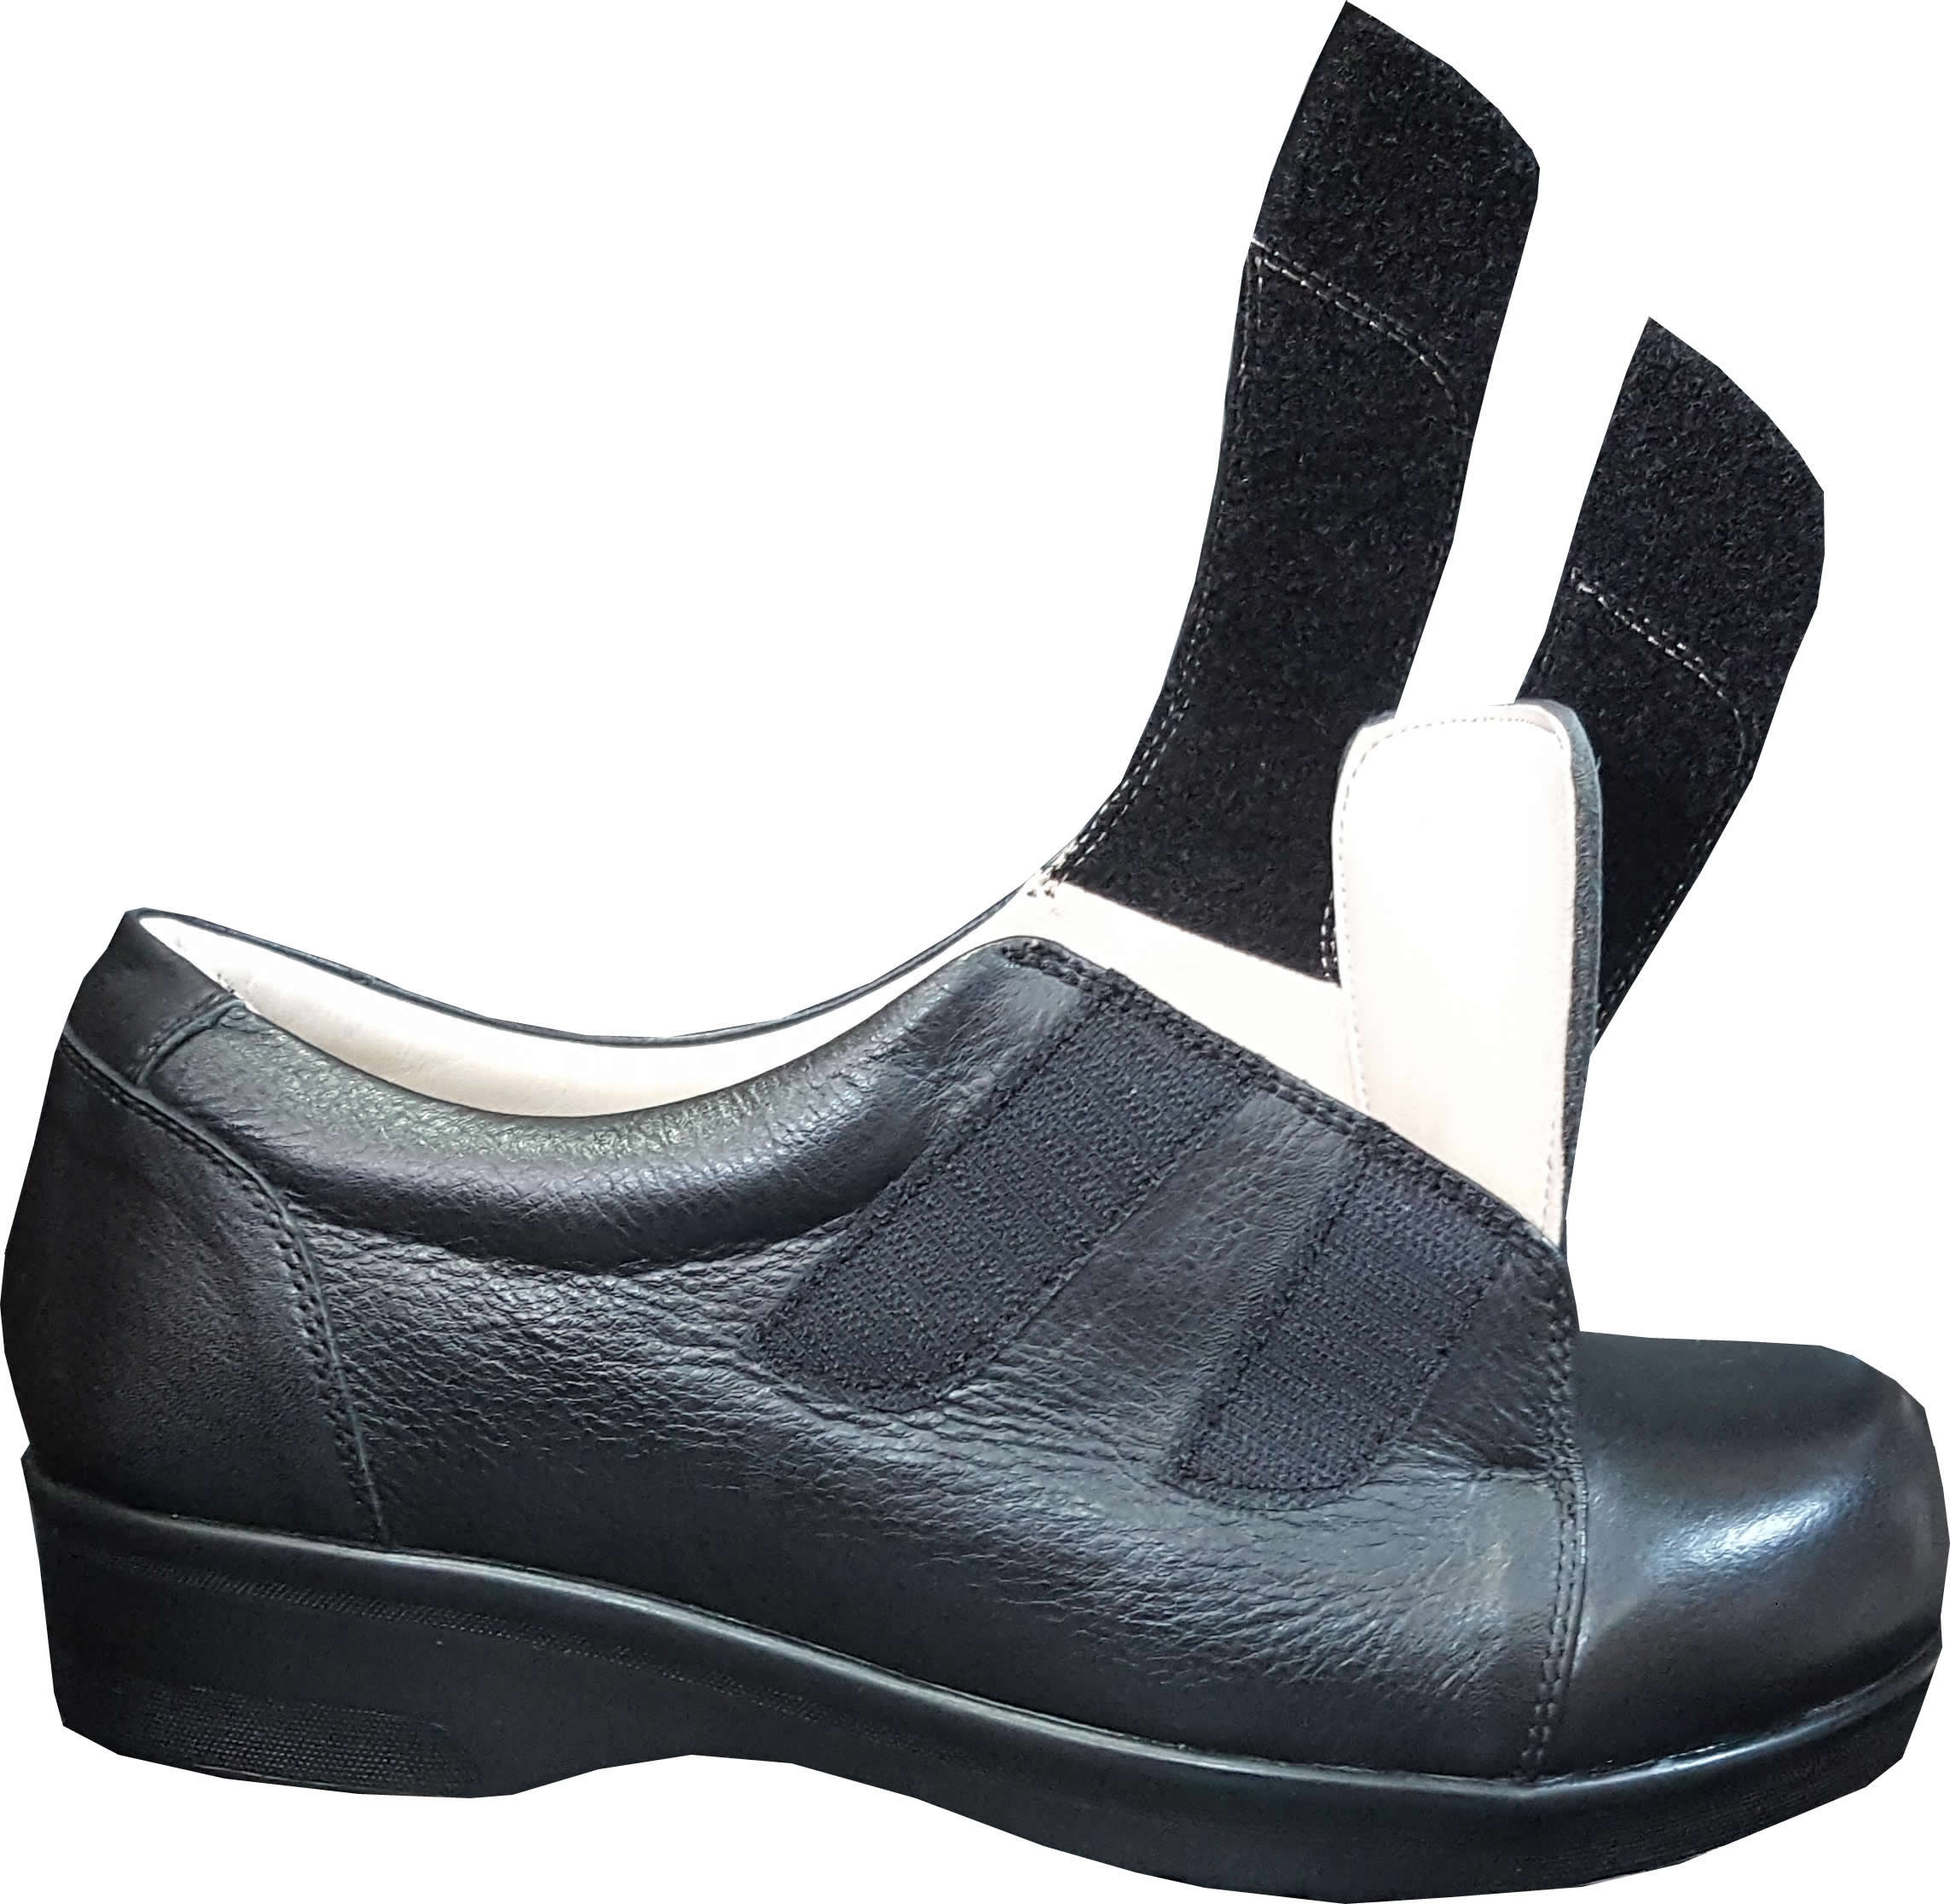 Extra Wide Plantar Fasciitis Shoes for 